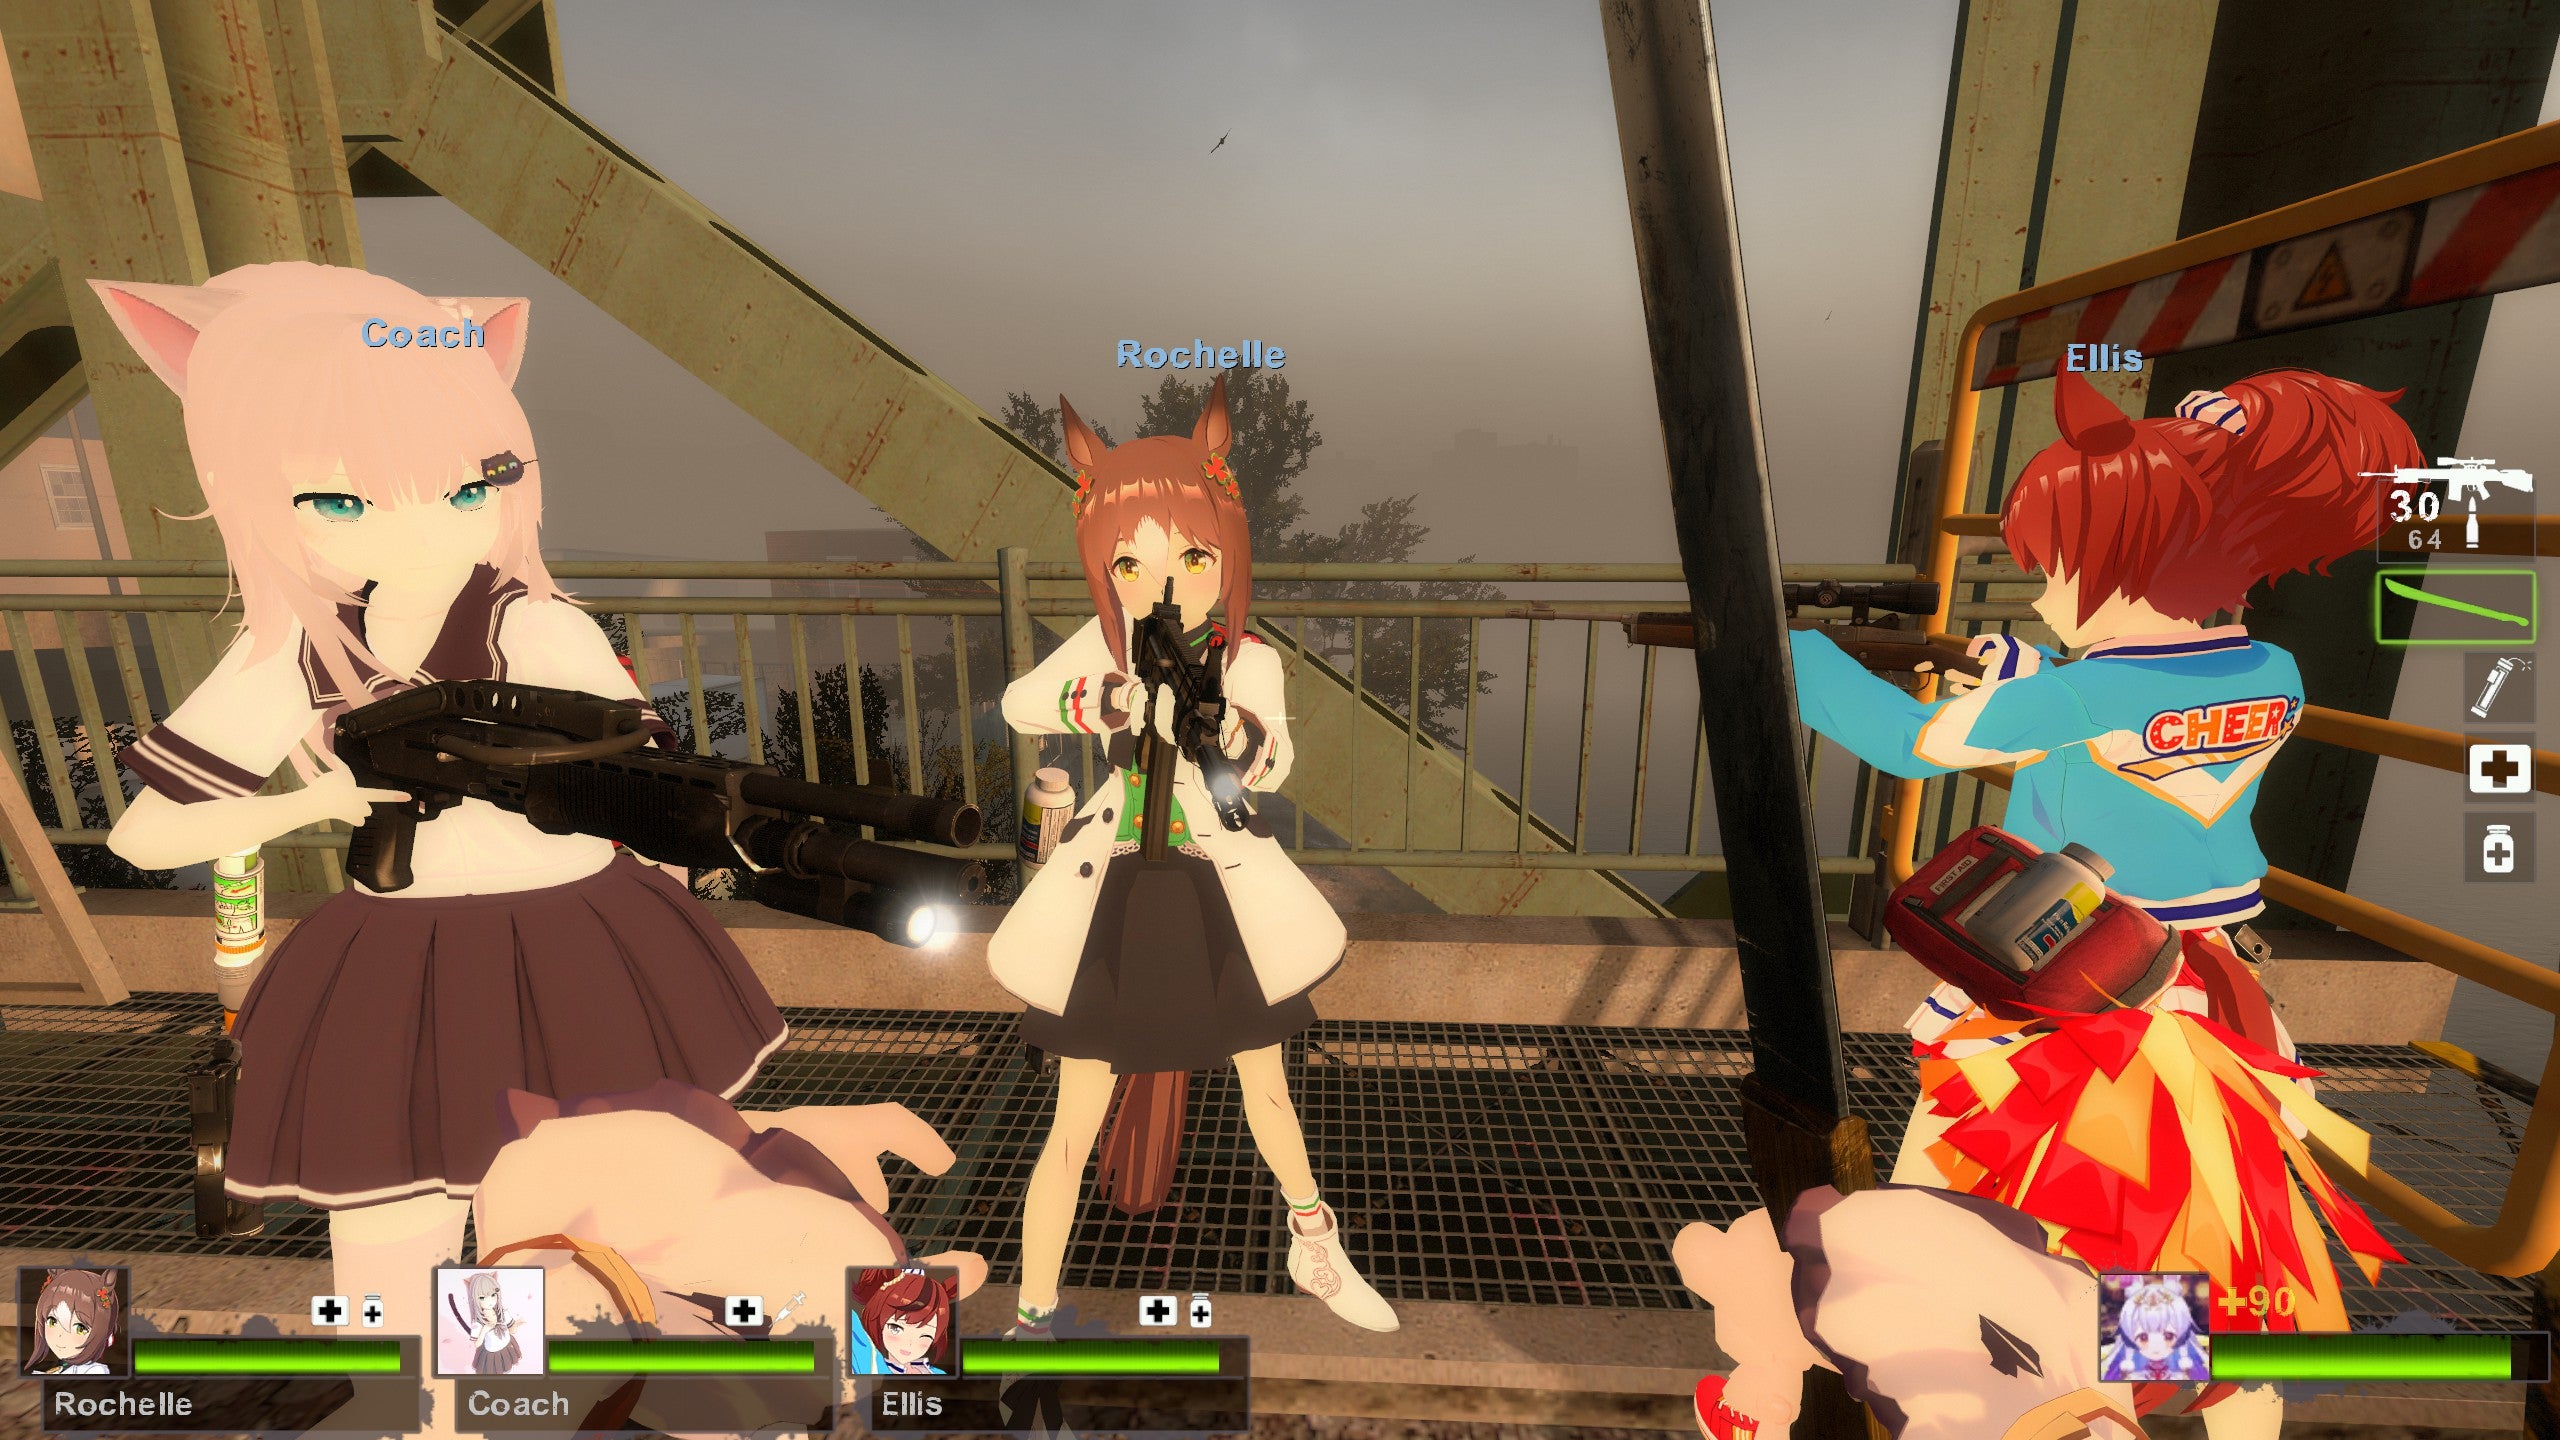 A squad of tooled-up anime girls in a modded Left 4 Dead 2 screenshot.